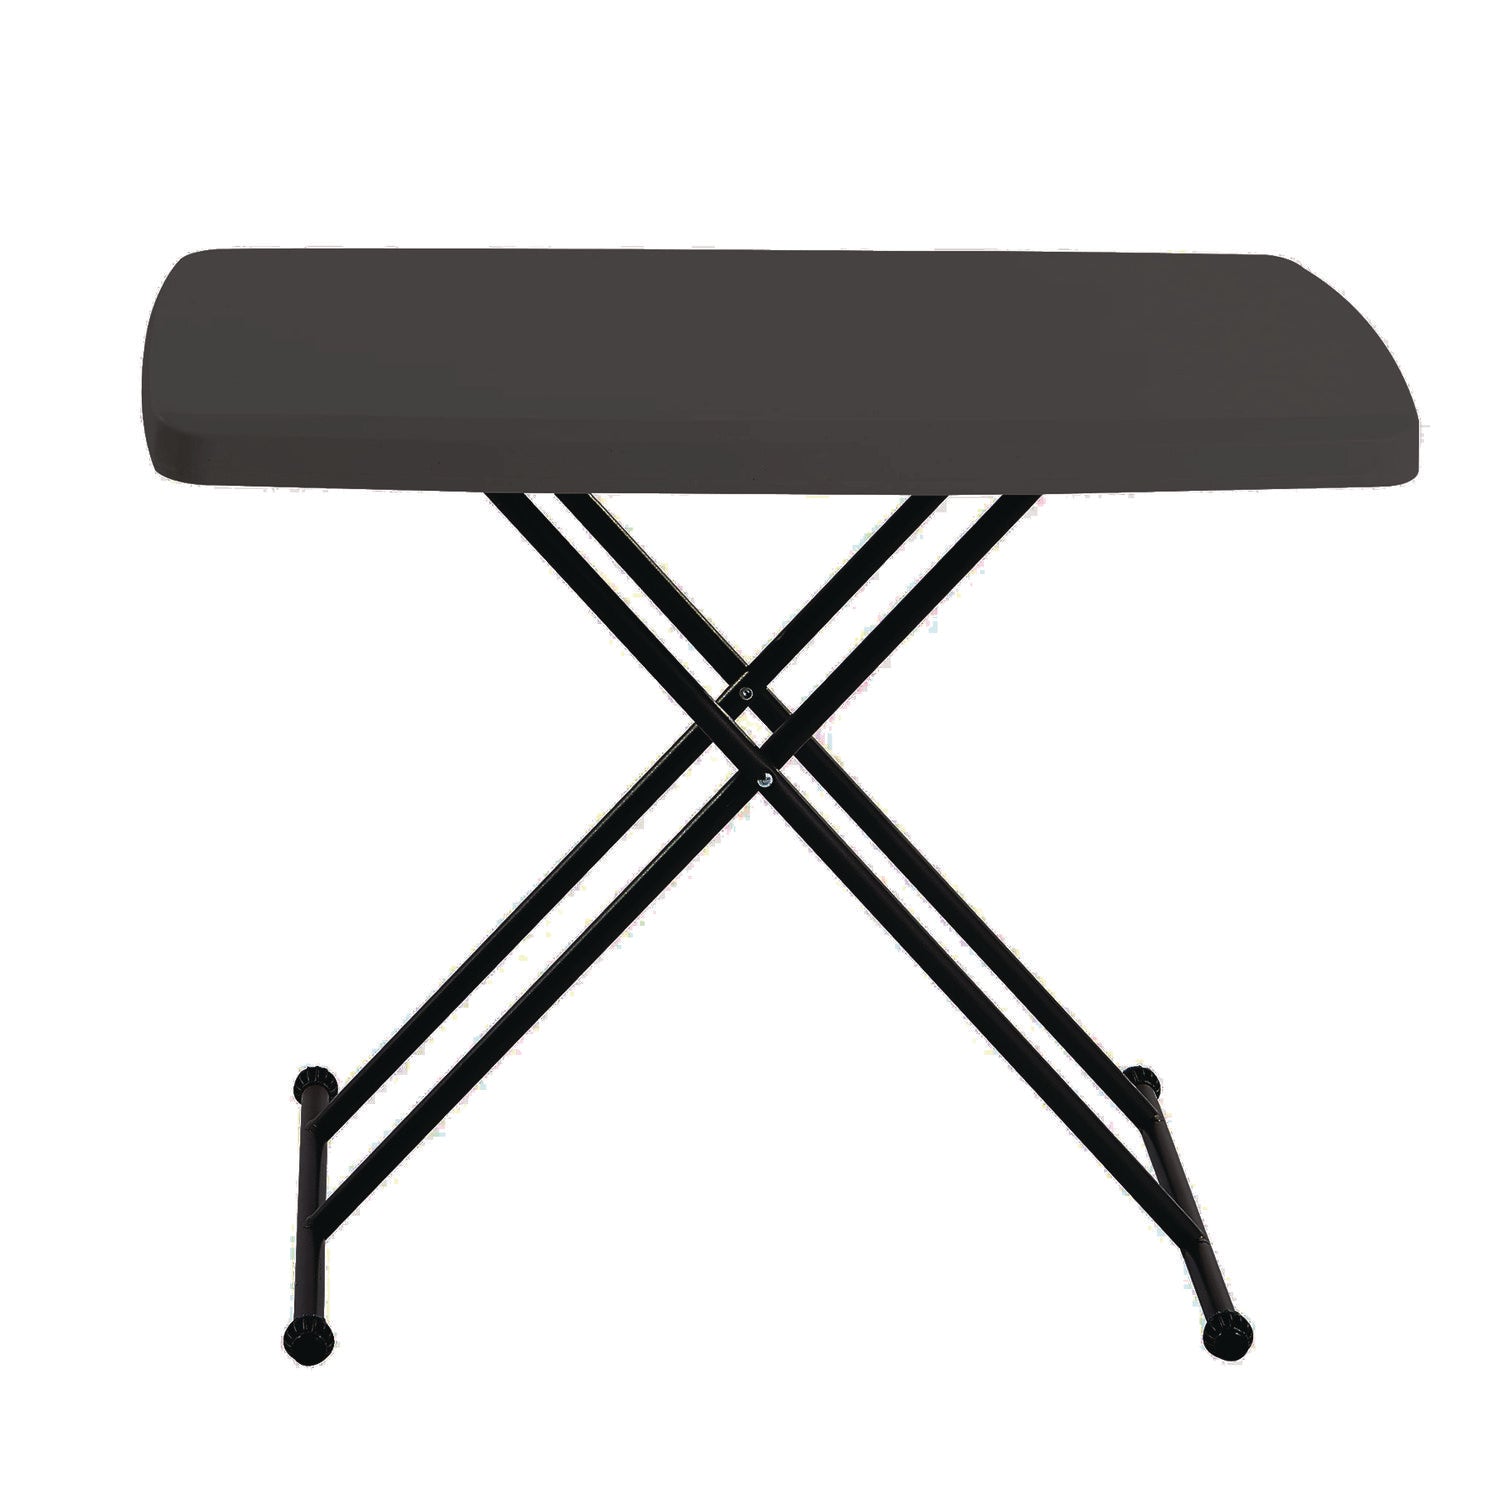 IndestrucTable Classic Personal Folding Table, 30" x 20" x 25" to 28", Charcoal - 7